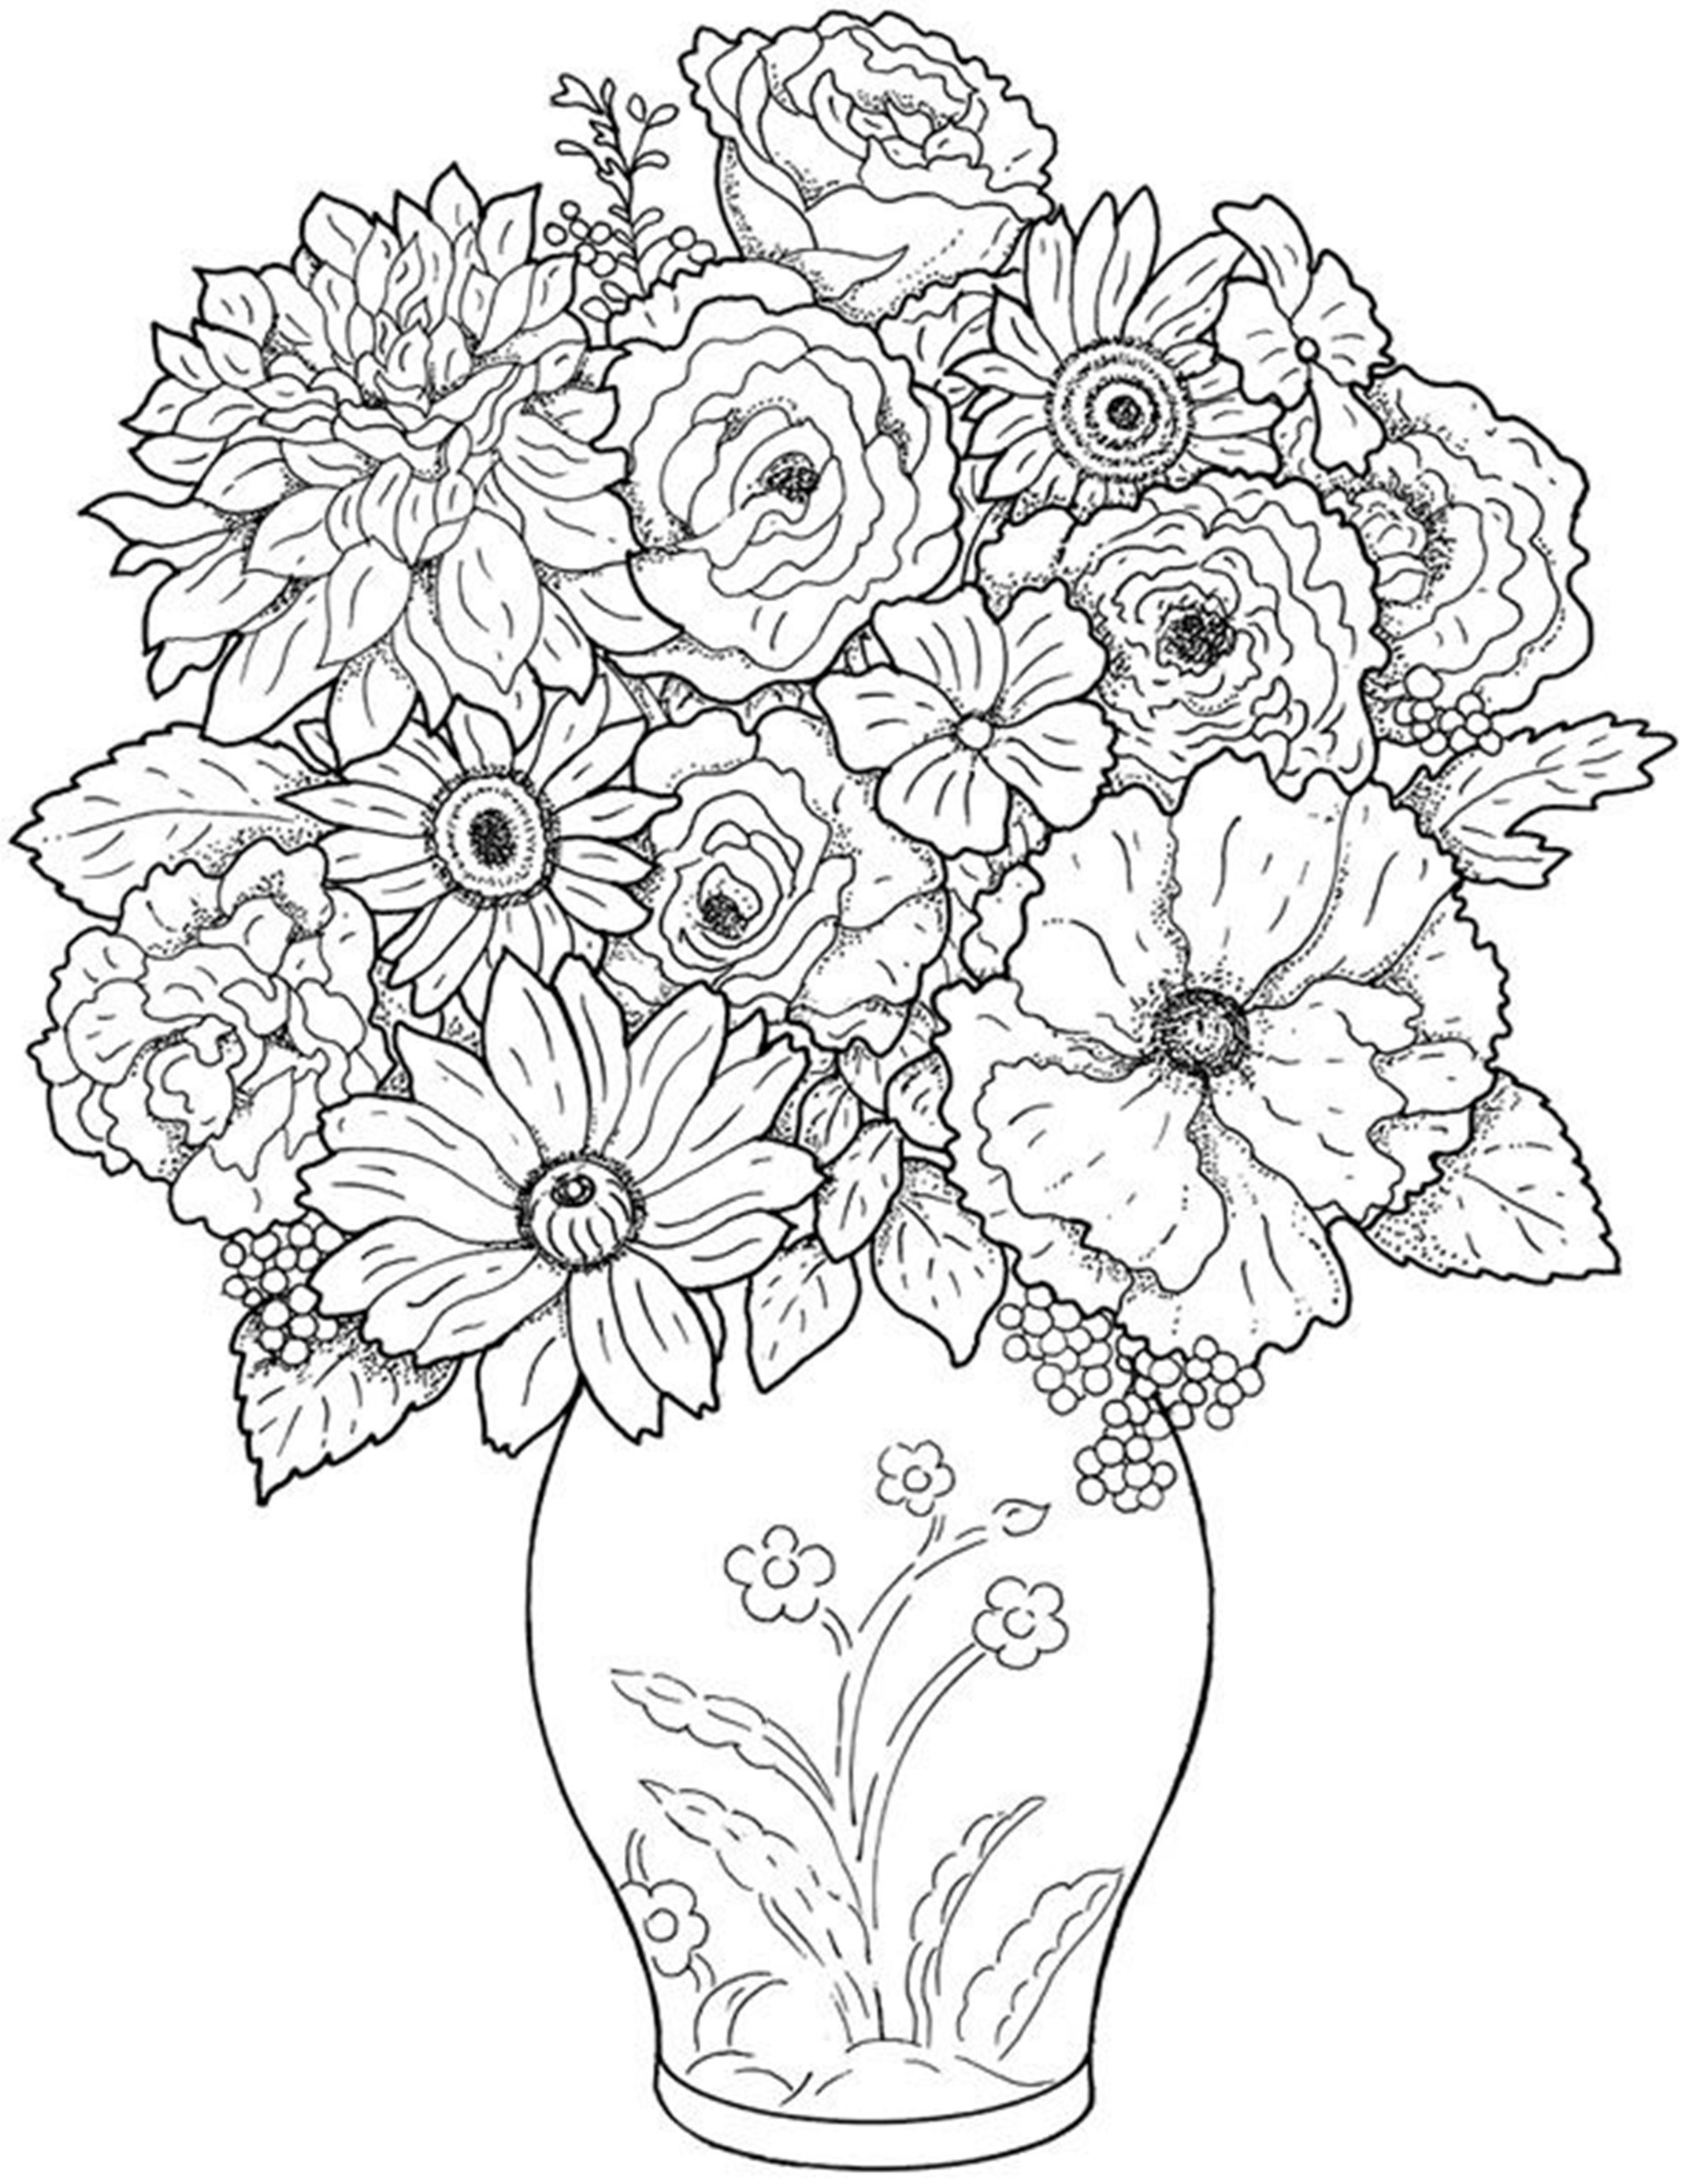 Free Printable Flowers Coloring Pages #10520 - Free Printable Flower Coloring Pages